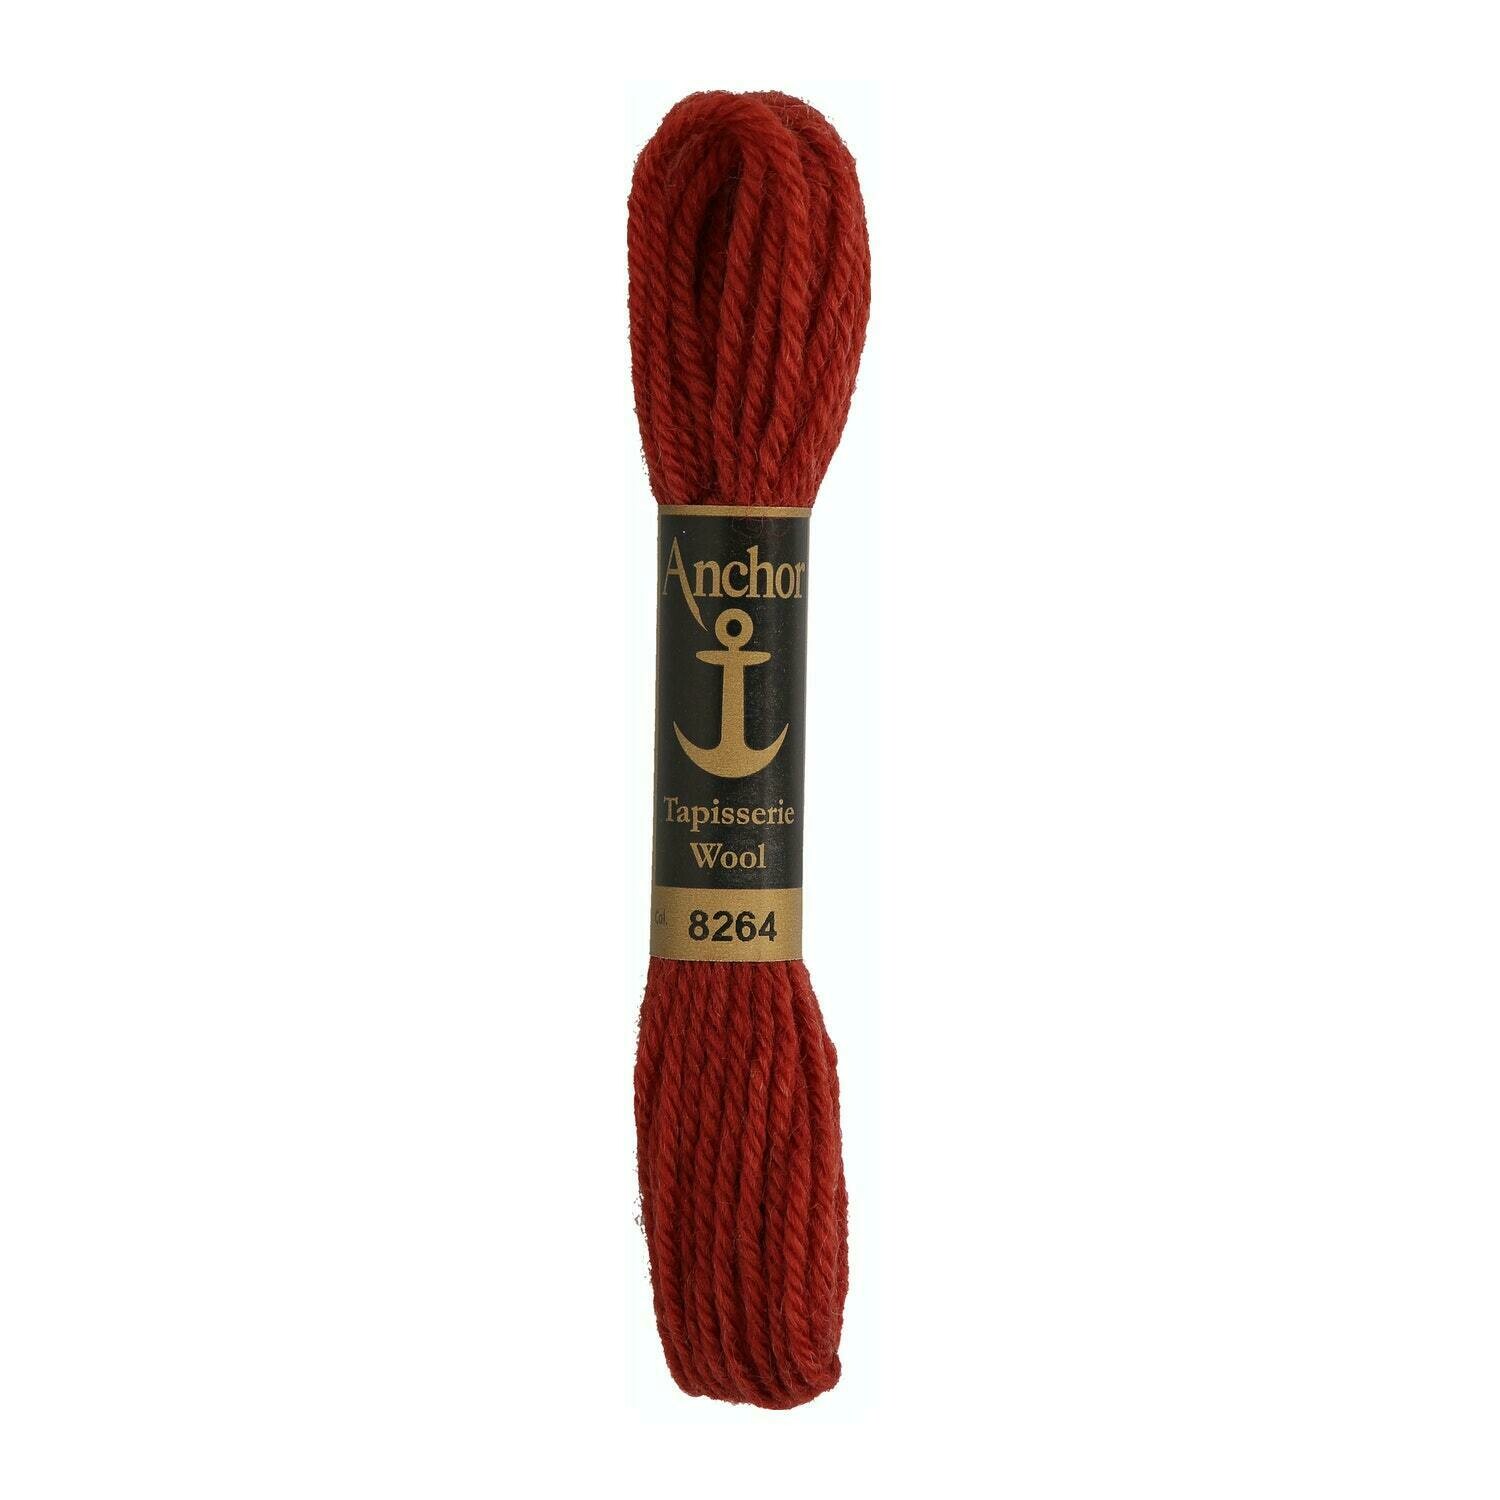 Anchor Tapisserie Wool #08402